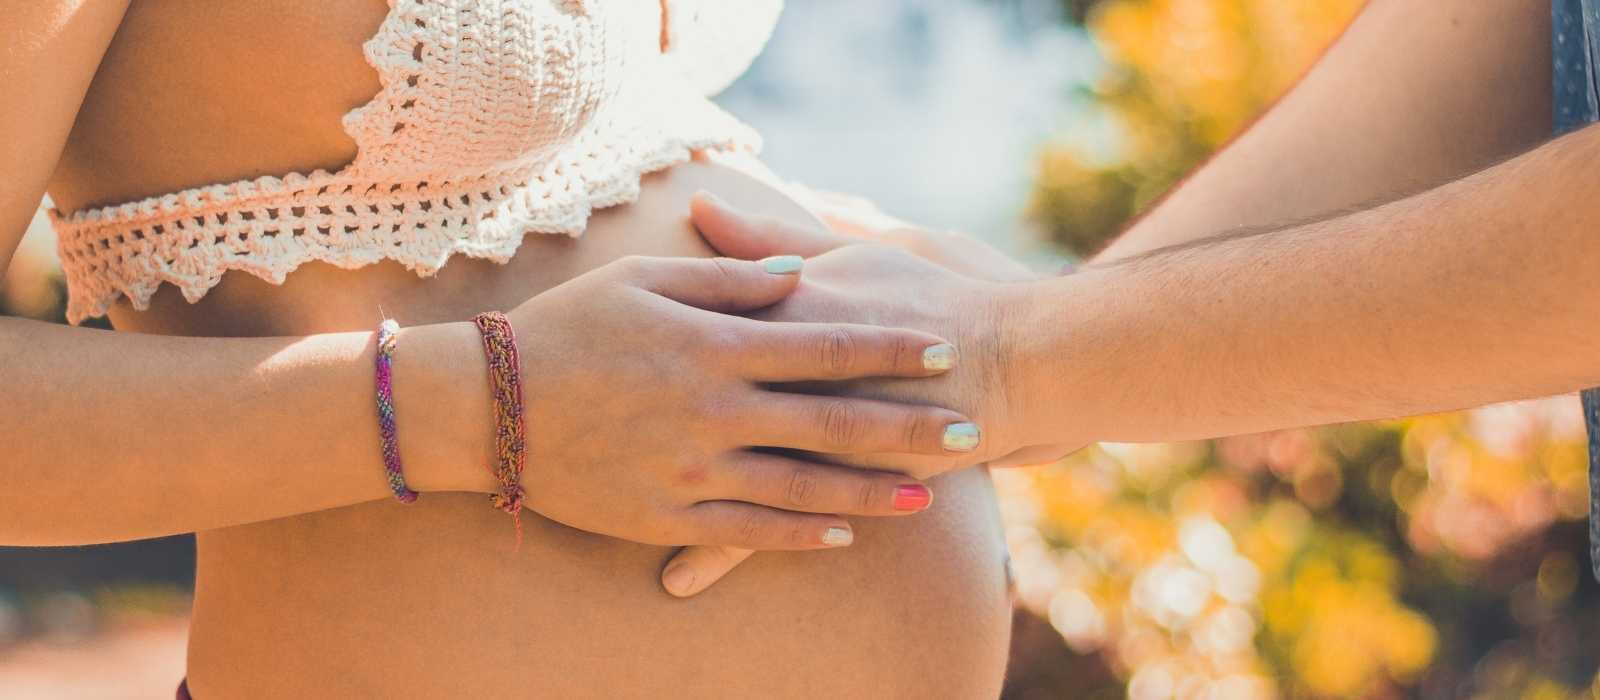 10 THINGS ALL MEN SHOULD KNOW ABOUT PREGNANCY